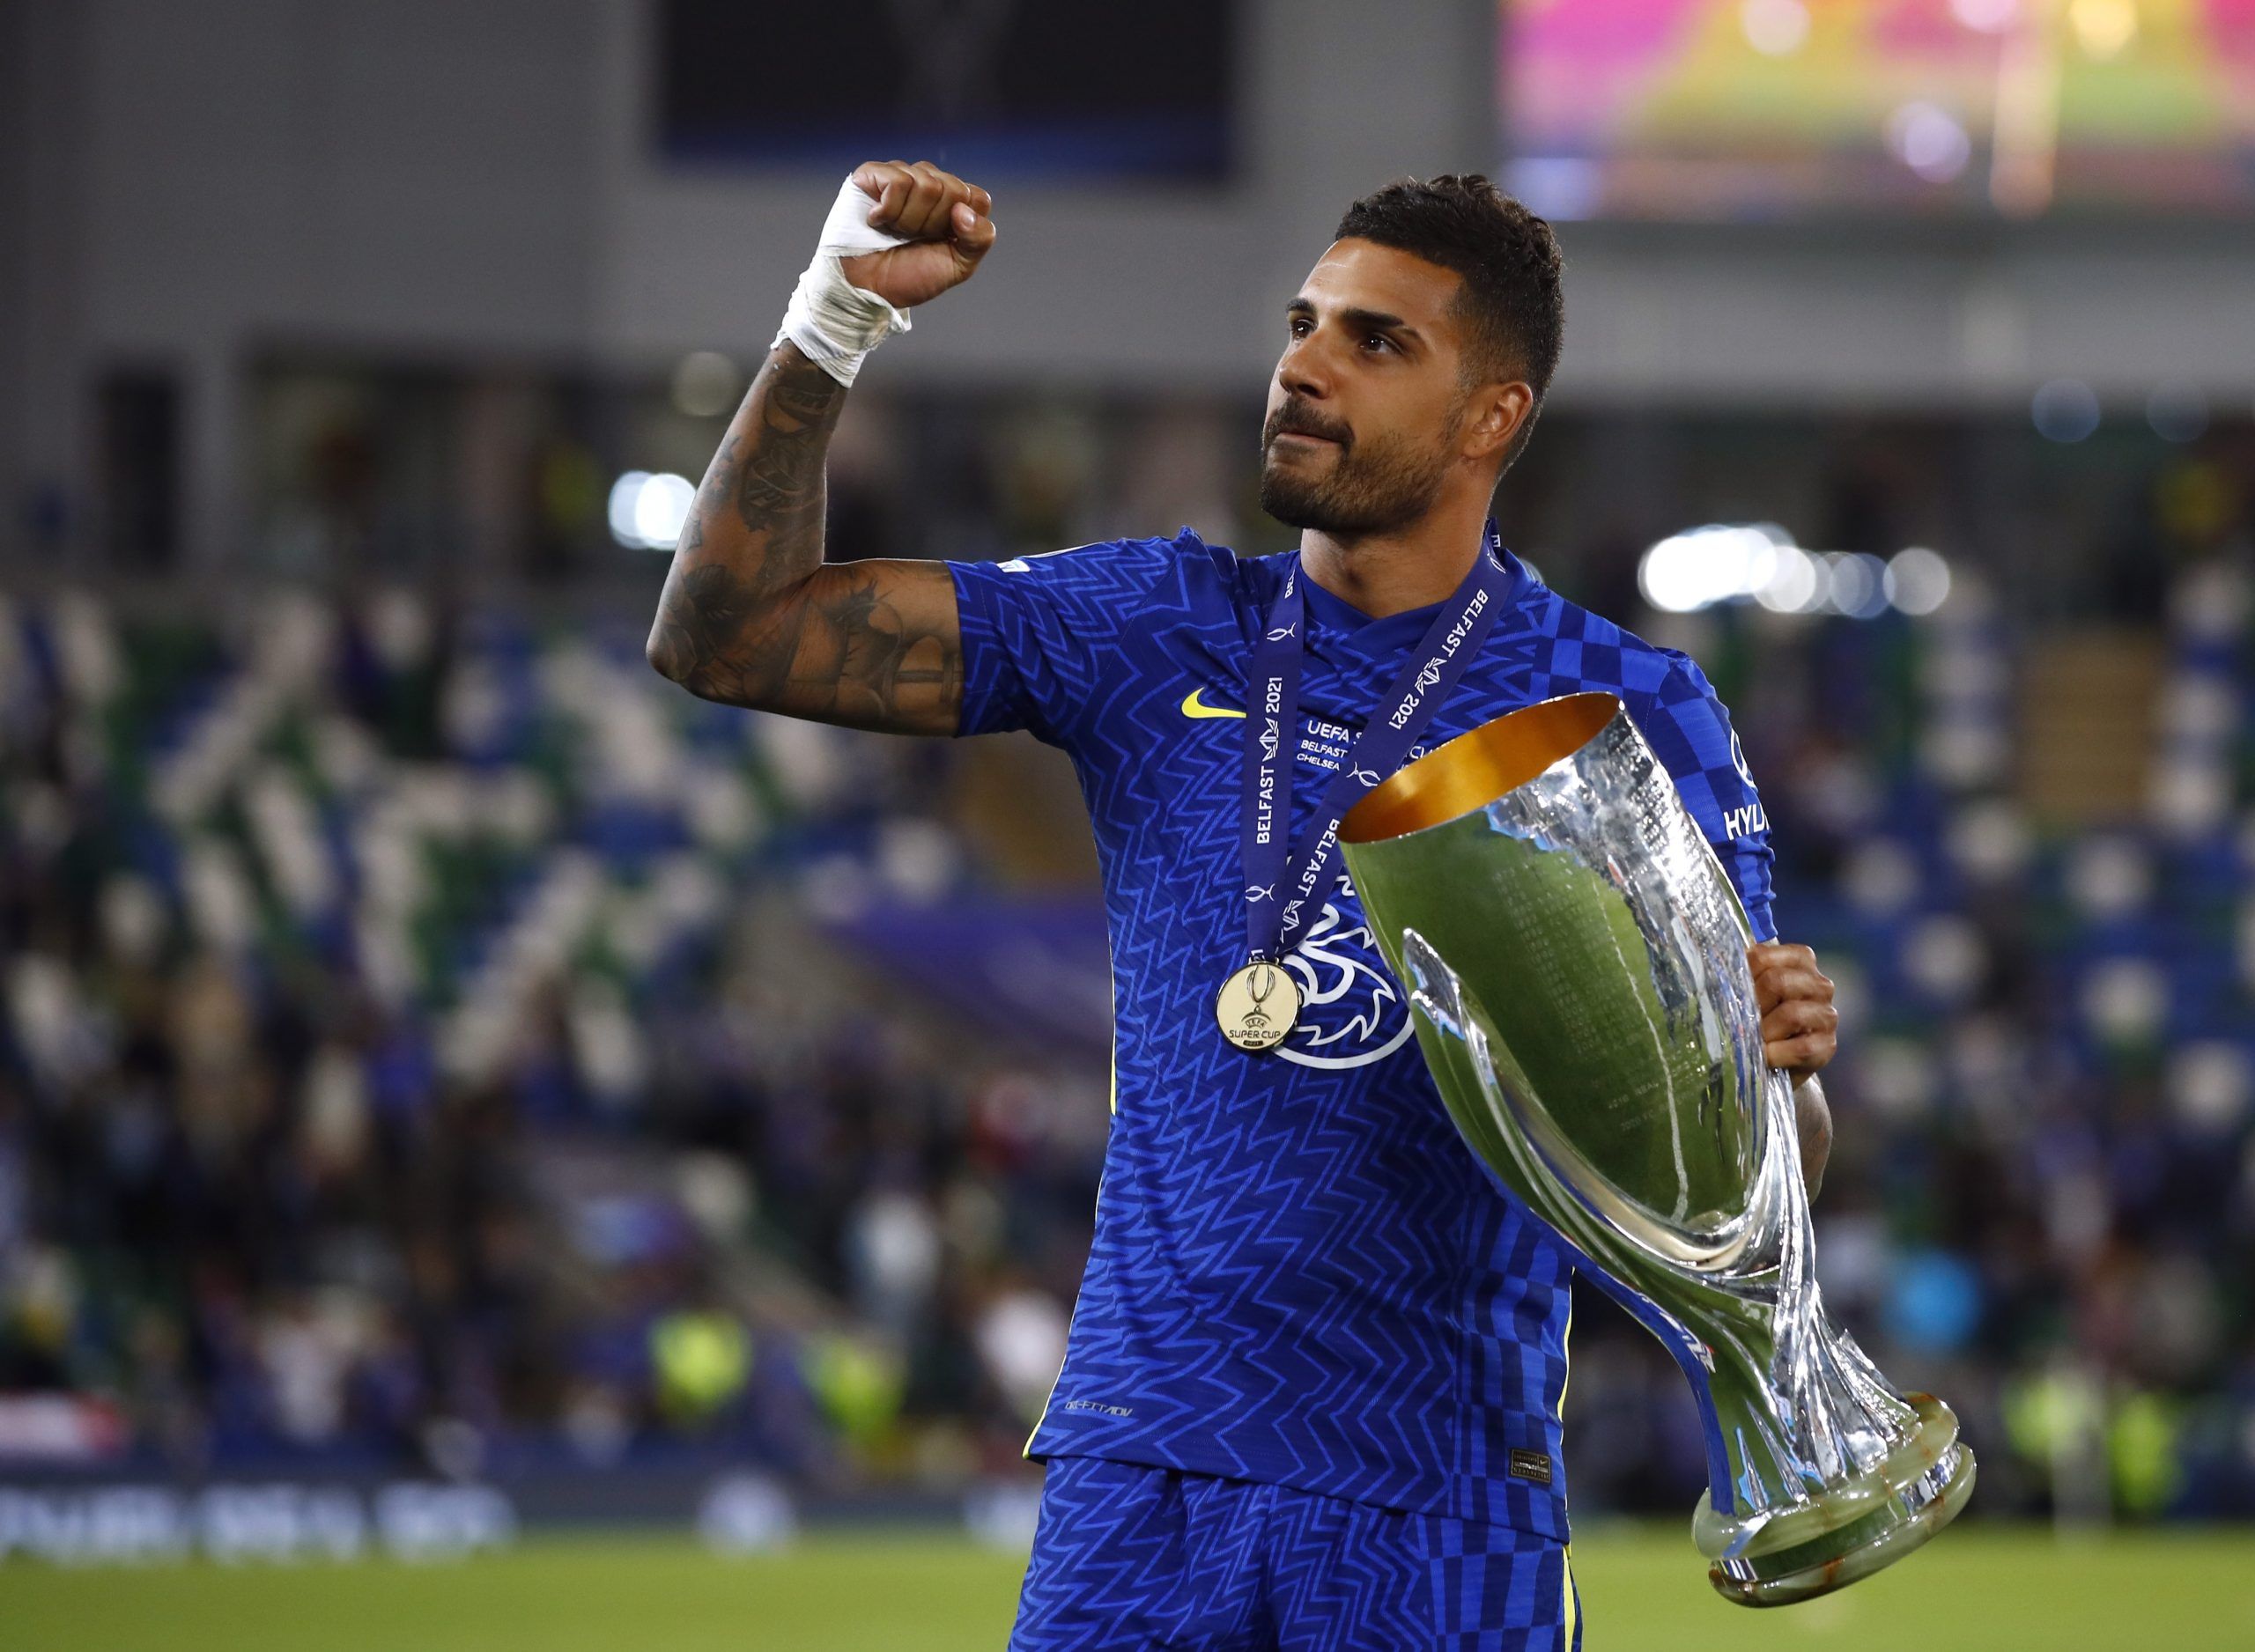 Soccer Football - European Super Cup - Chelsea v Villarreal - Windsor Park, Belfast, Northern Ireland - August 11, 2021 Chelsea's Emerson celebrates with the trophy after winning the penalty shoot-out and the European Super Cup Action Images via Reuters/Jason Cairnduff